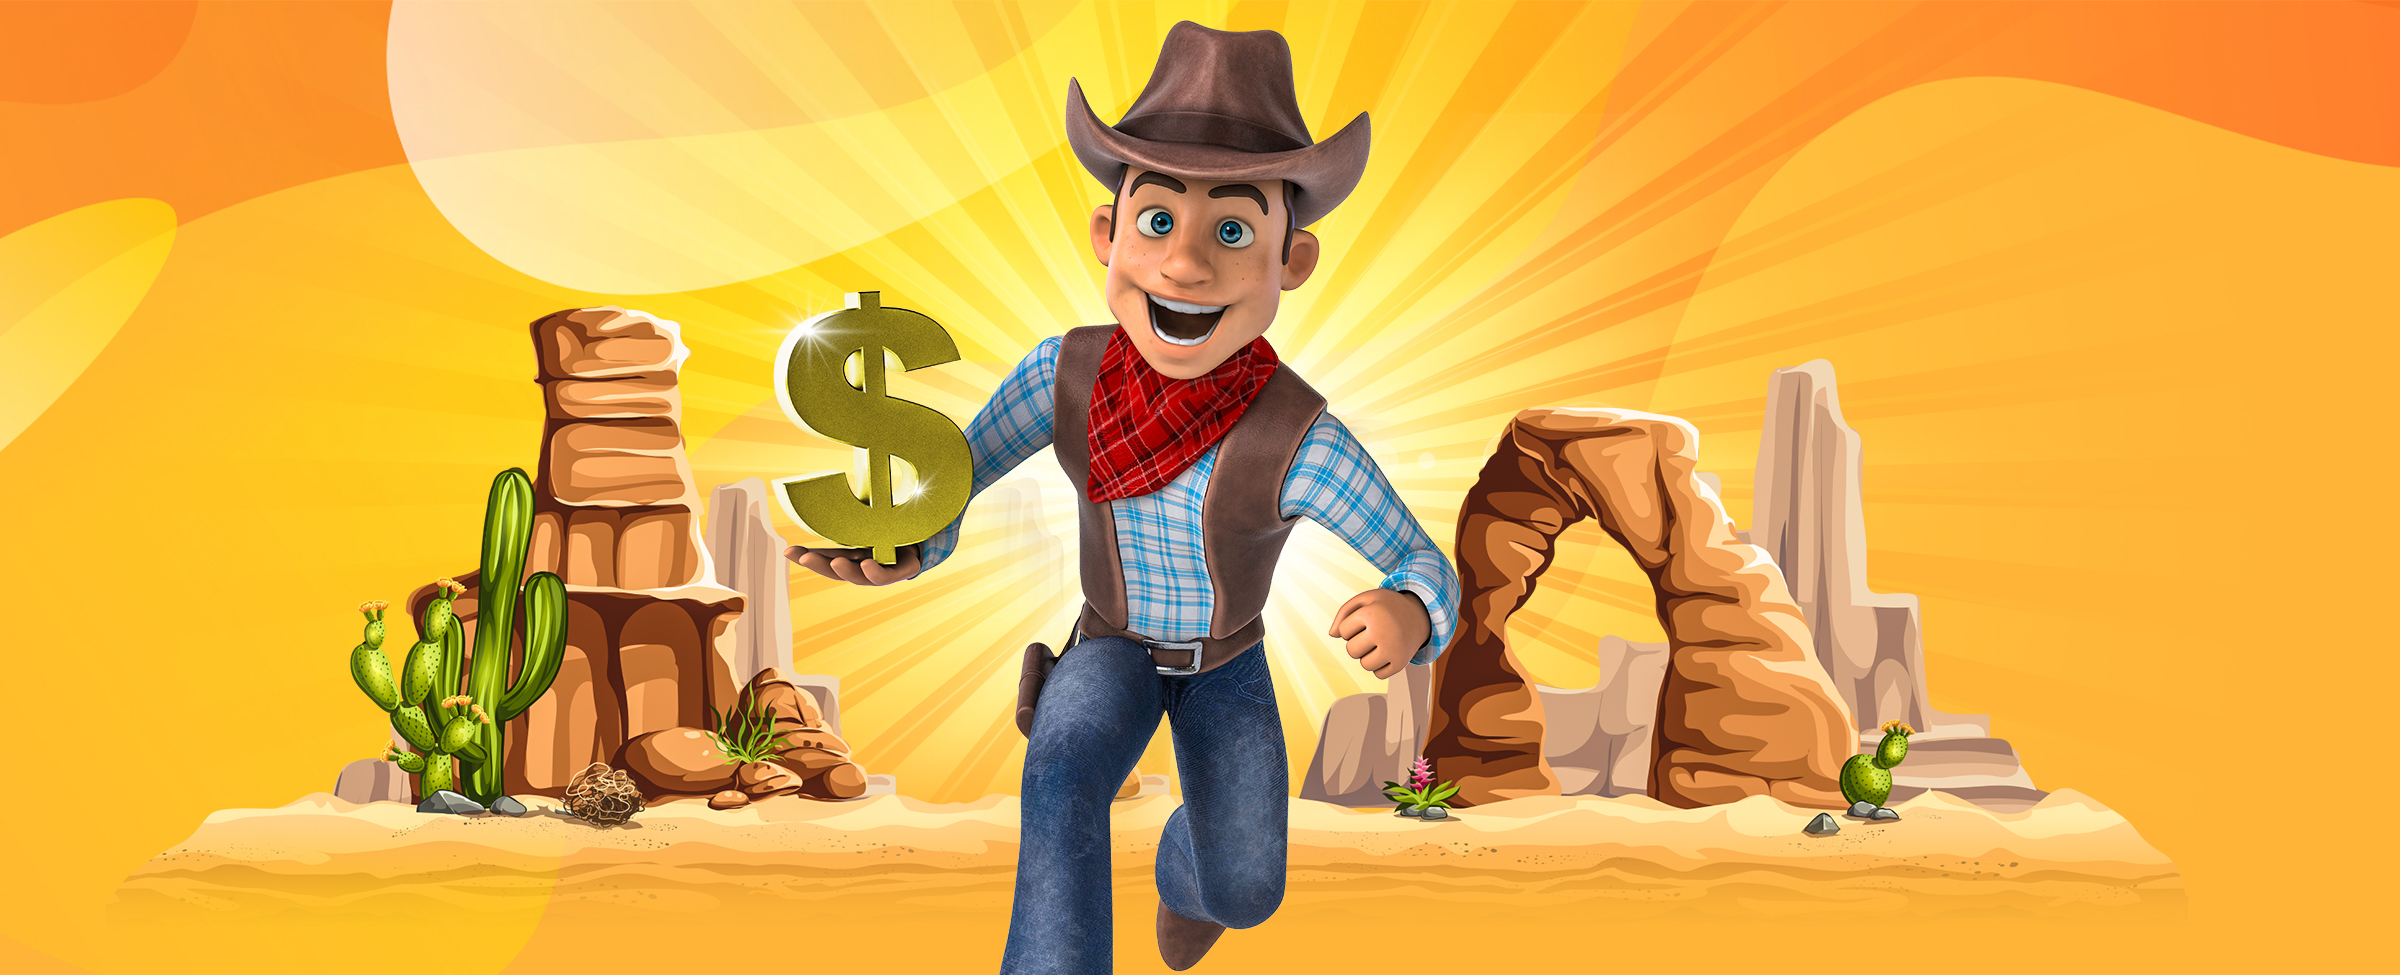 A 3D-animated character of a cowboy holding a large dollar sign while running, while in the background, animated rocks and cacti appear against the desert sand.